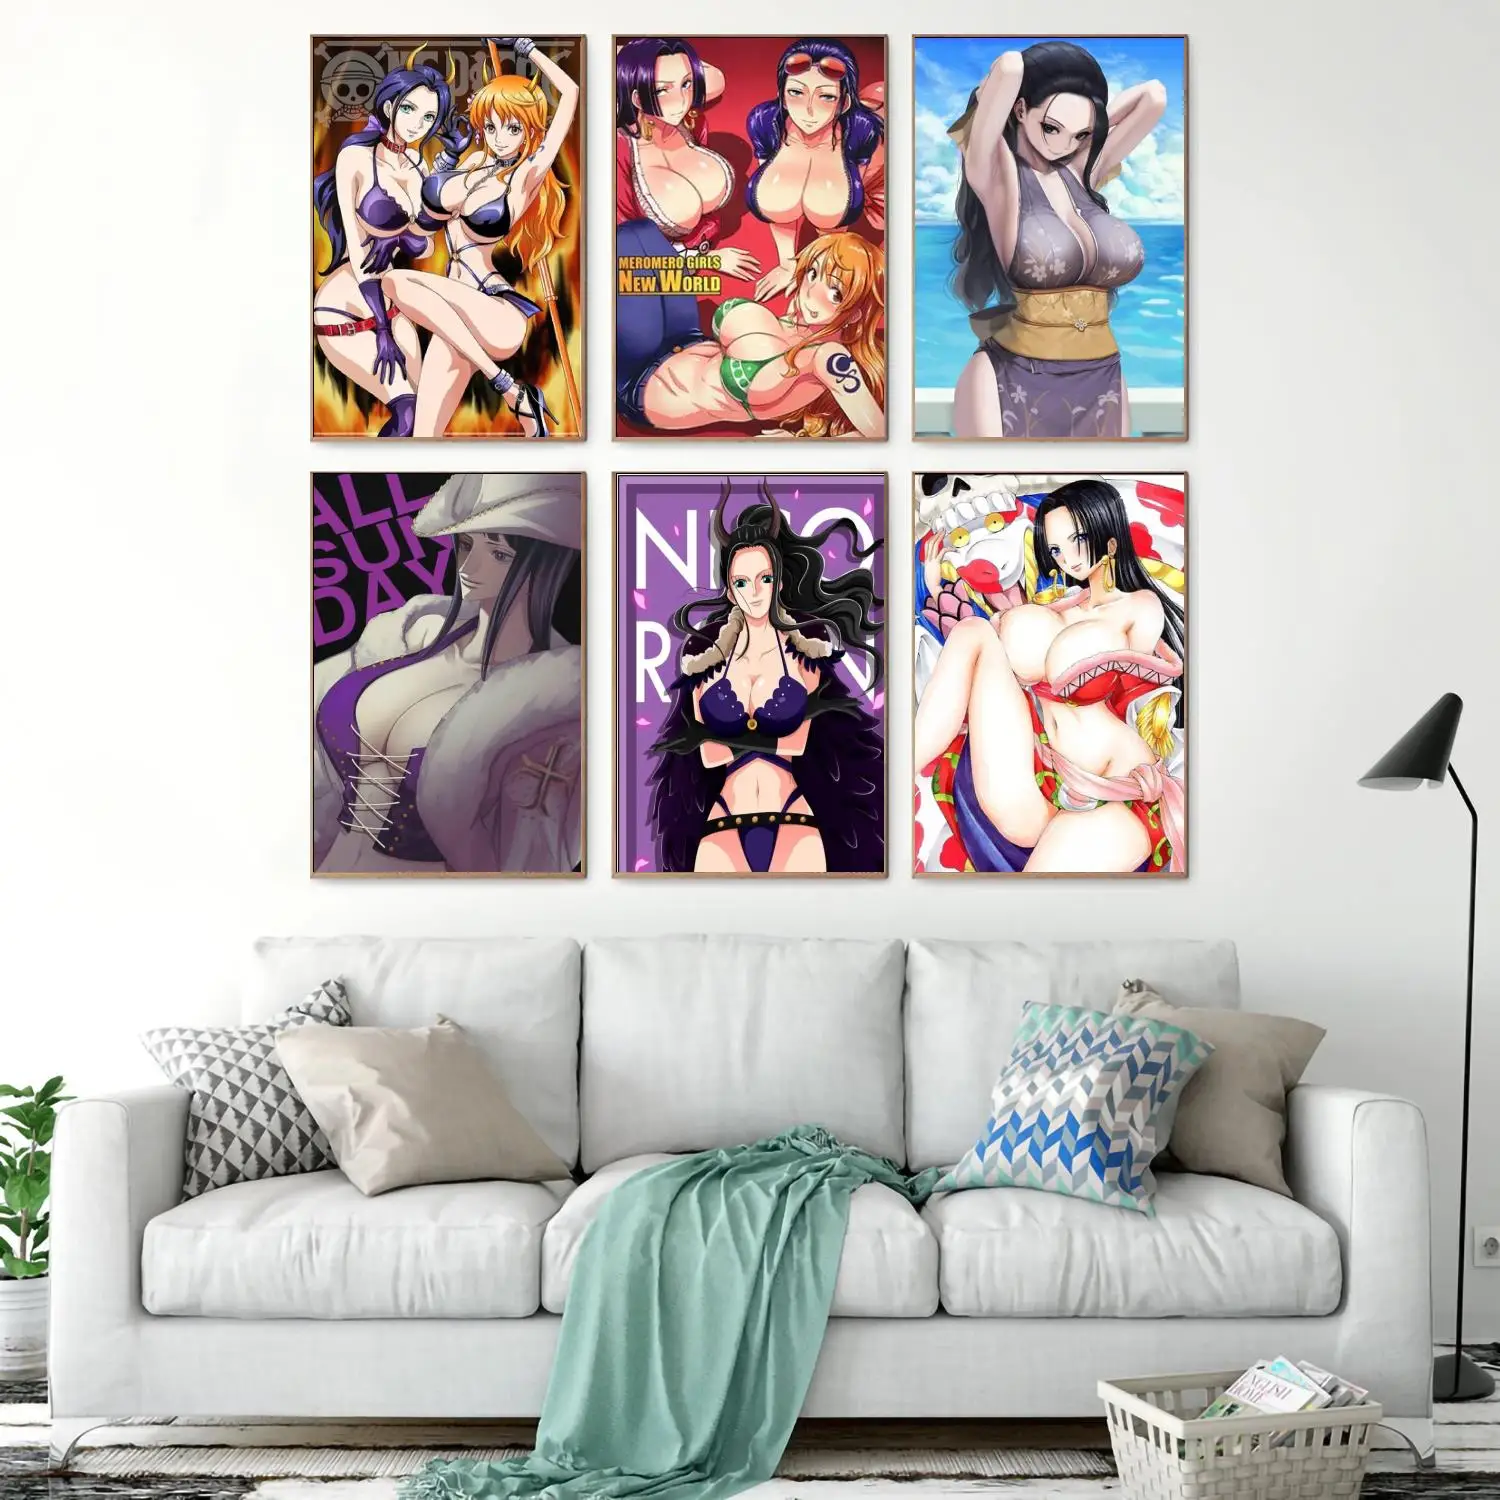 

nico robin comic character Decoration Art Poster Wall Art Personalized Gift Modern Family bedroom Decor 24x36 Canvas Posters